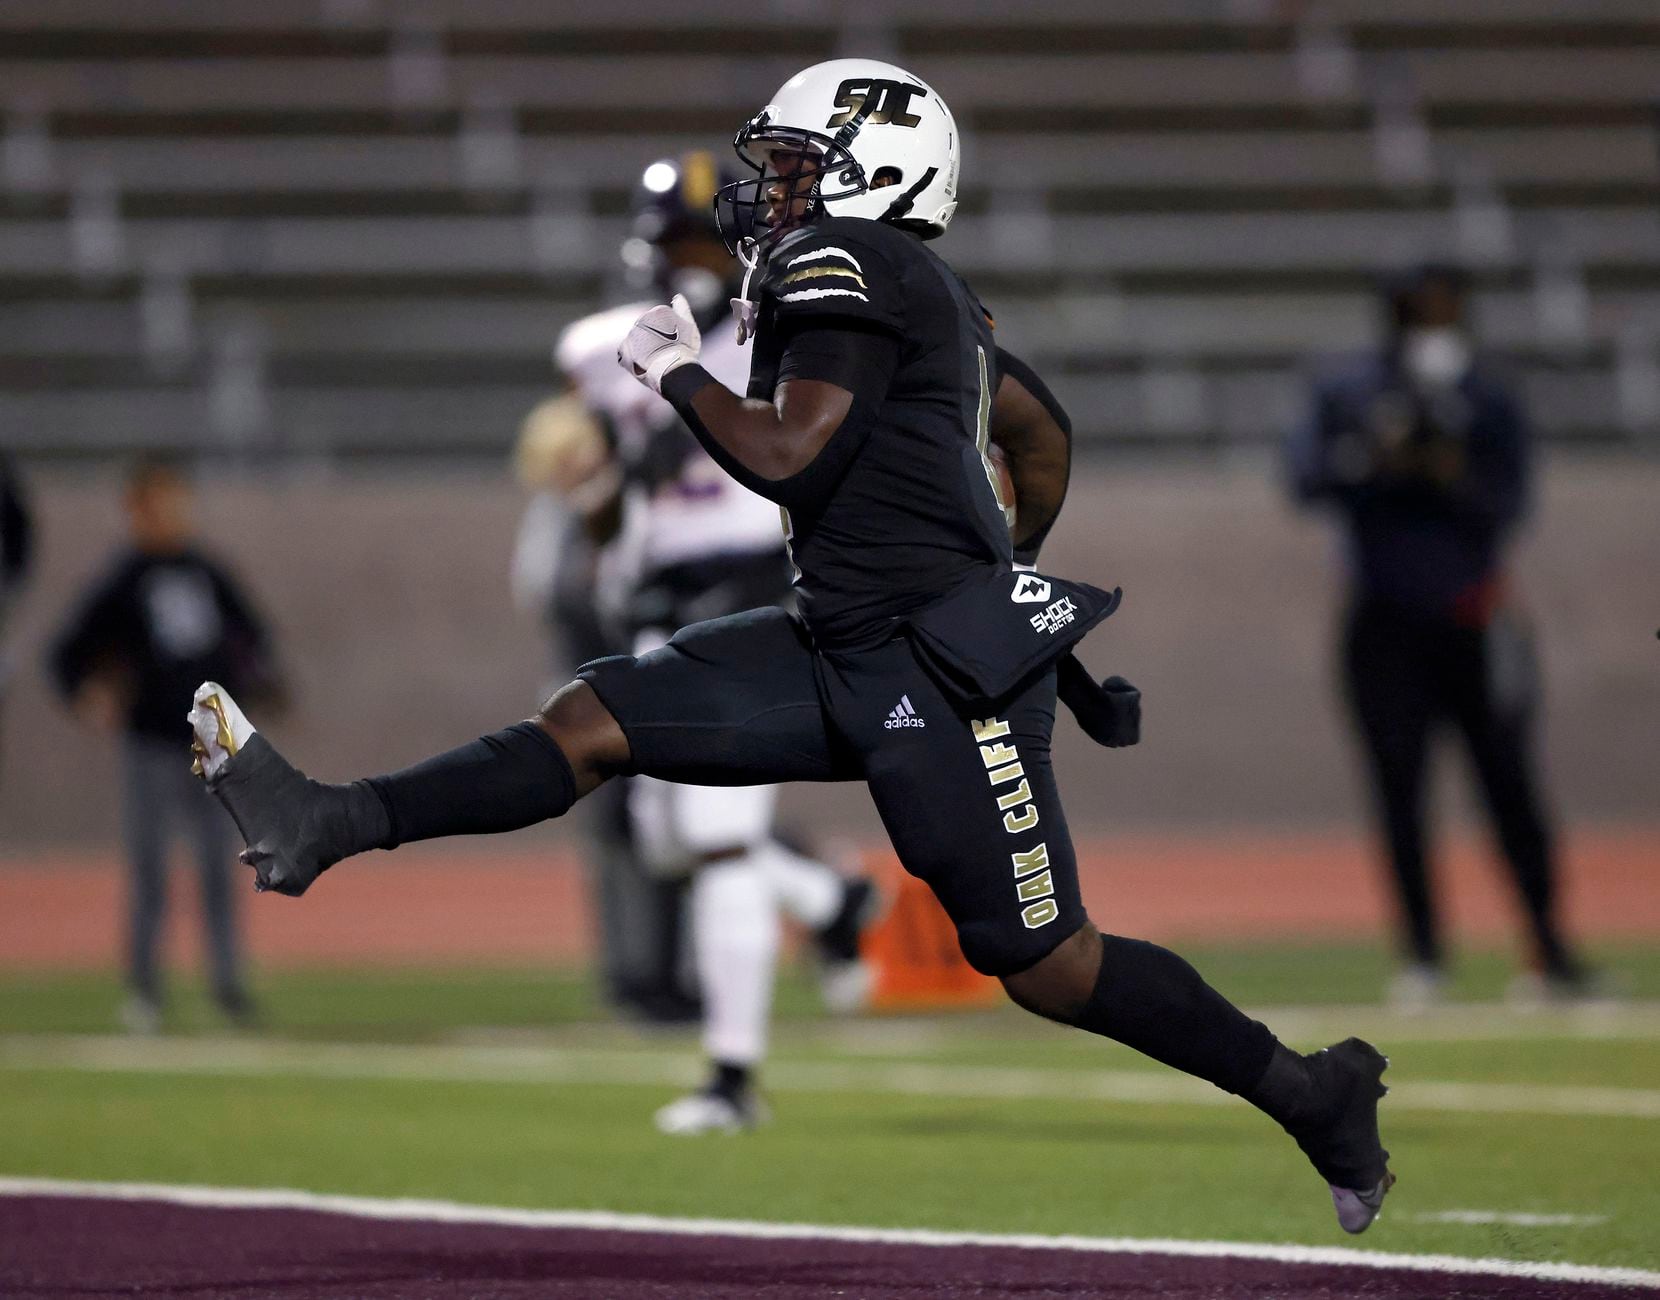 South Oak Cliff running back Qualon Farrar (4) high steps it into the end zone for a first quarter touchdown against Everman during their Class 5A Division II bi-district playoff game at Kincaide Stadium in Dallas, Thursday, November 11, 2021. (Tom Fox/The Dallas Morning News)